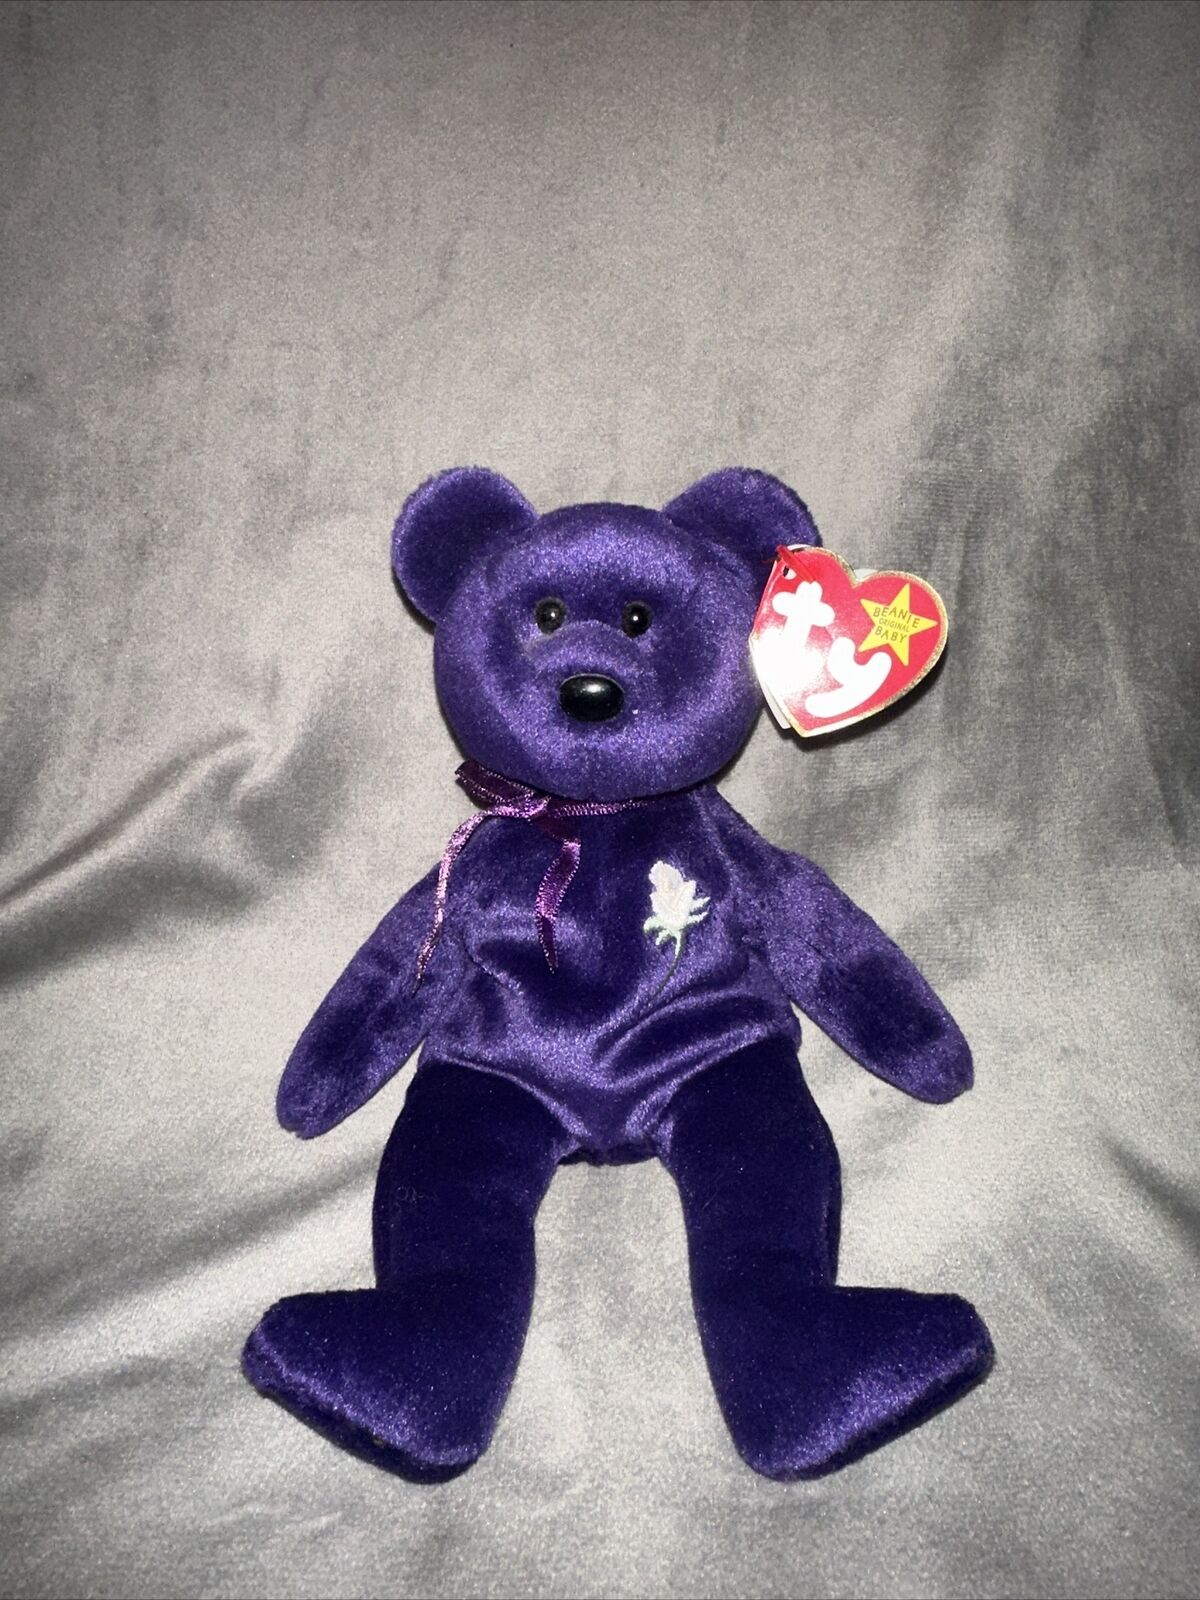 TY 1997 Princess Diana Beanie Baby RARE NEAR MINT CONDITION EXCLUSIVE 💜💜